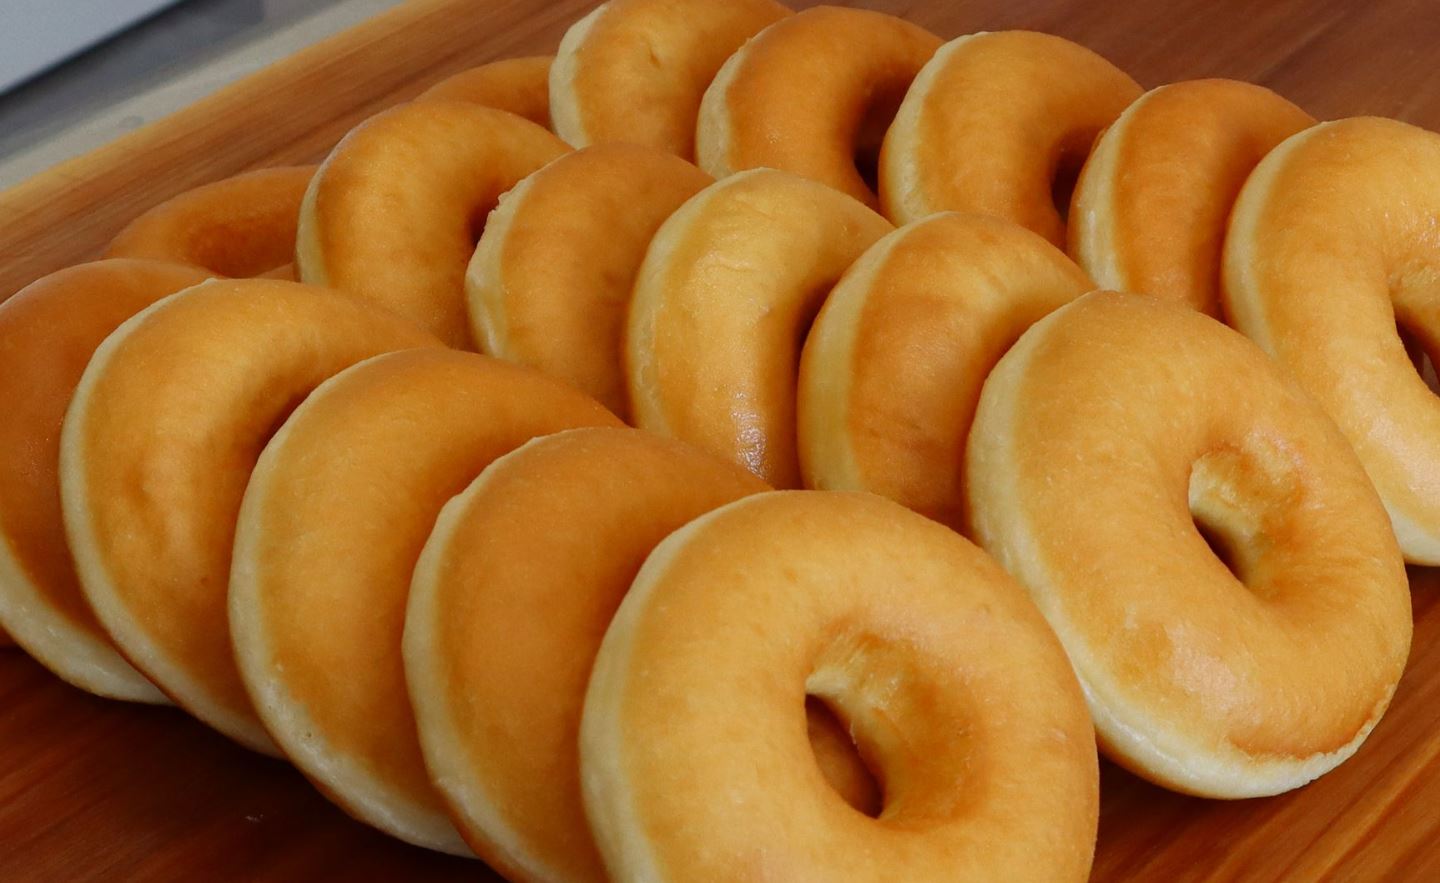 Soft and Fluffy Homemade Donuts